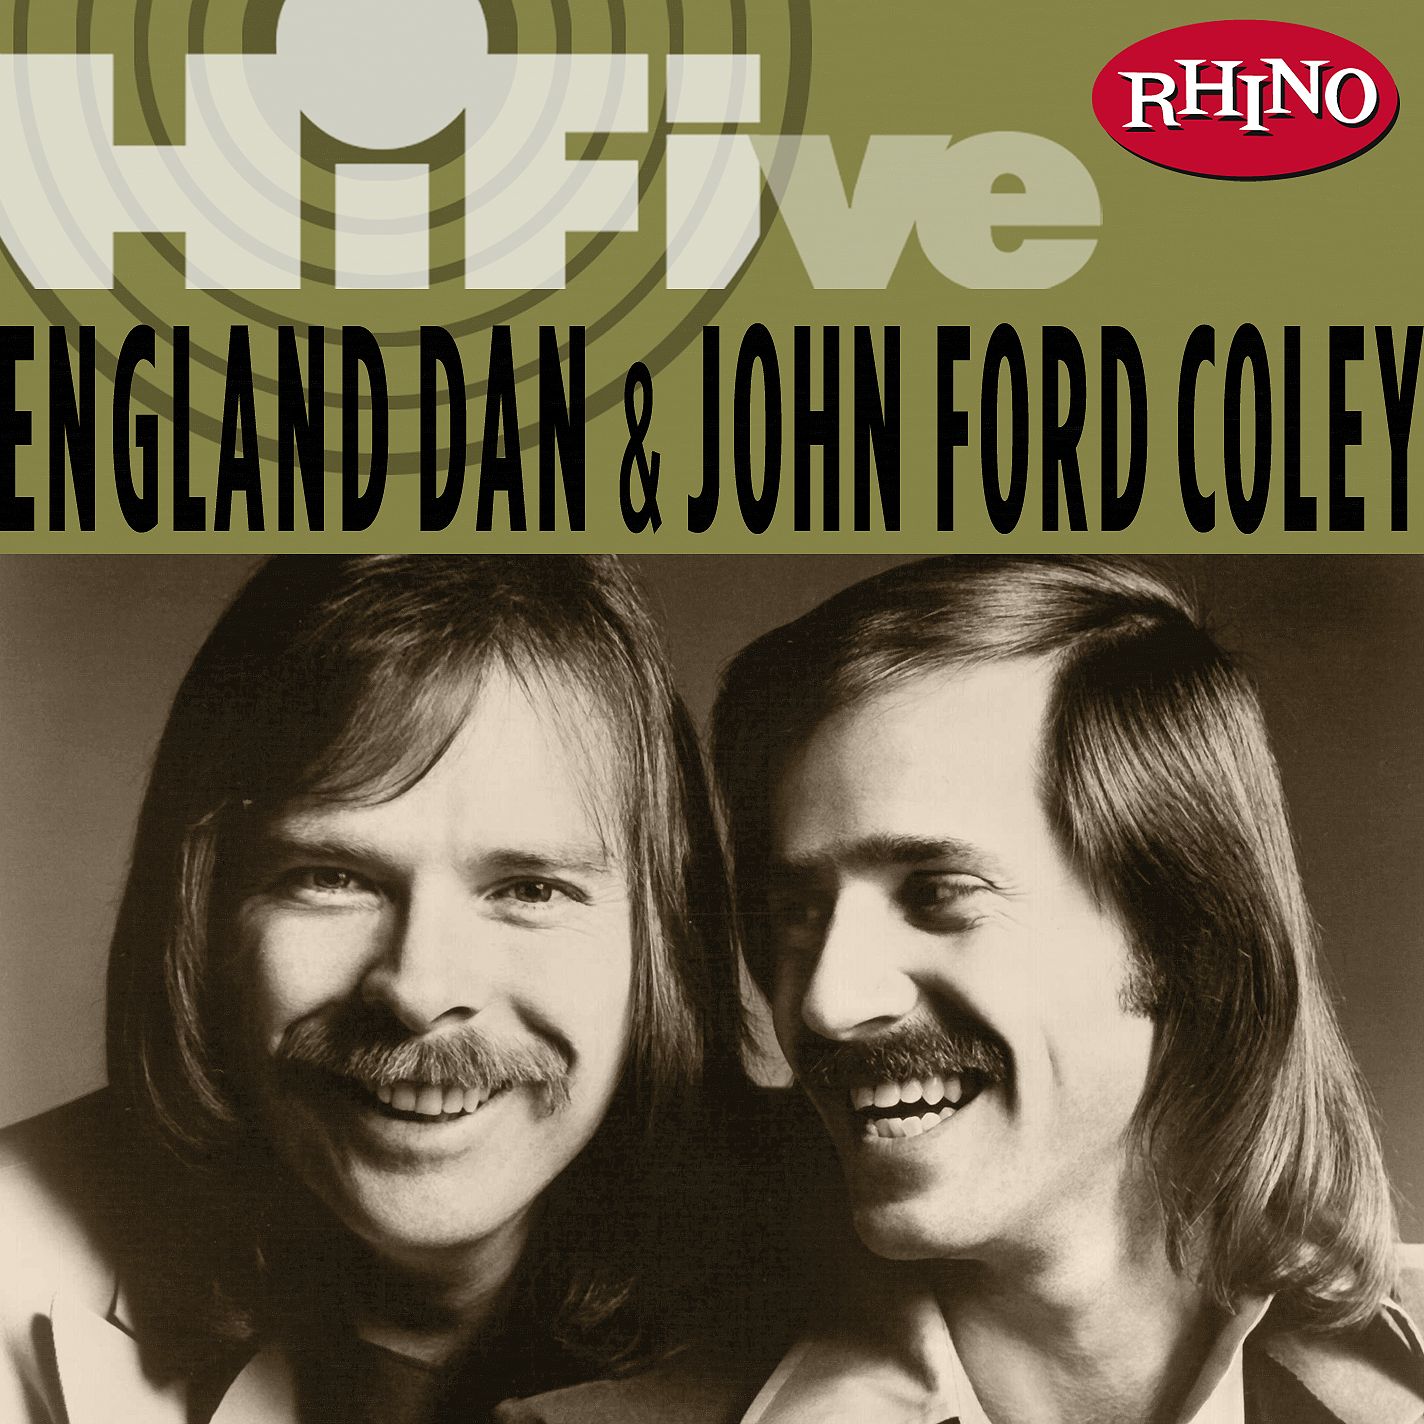 England dan and john ford coley greatest hits download